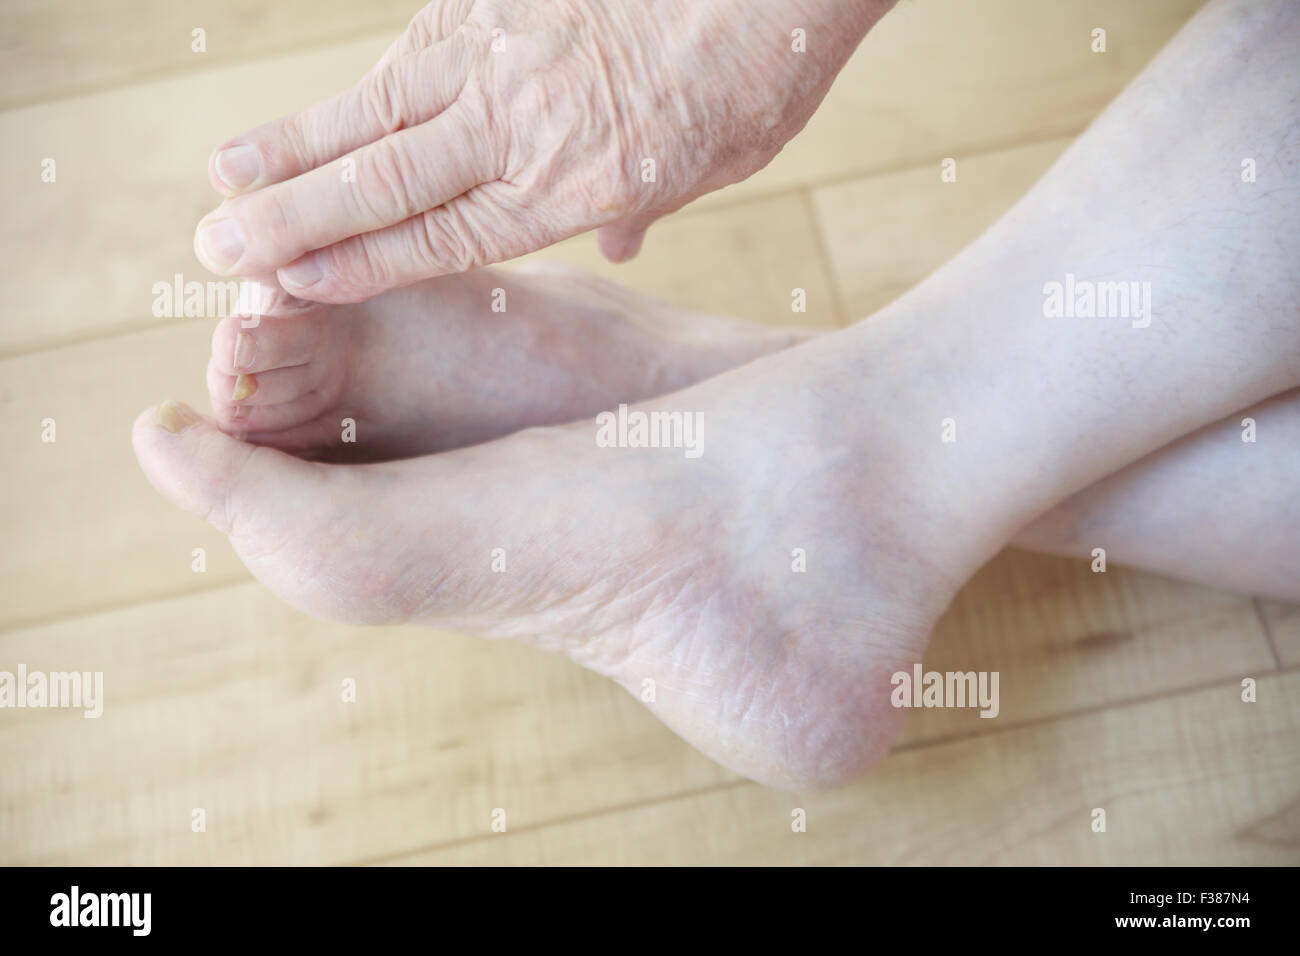 An older man reaches to touch his toes from a sitting position. Stock Photo